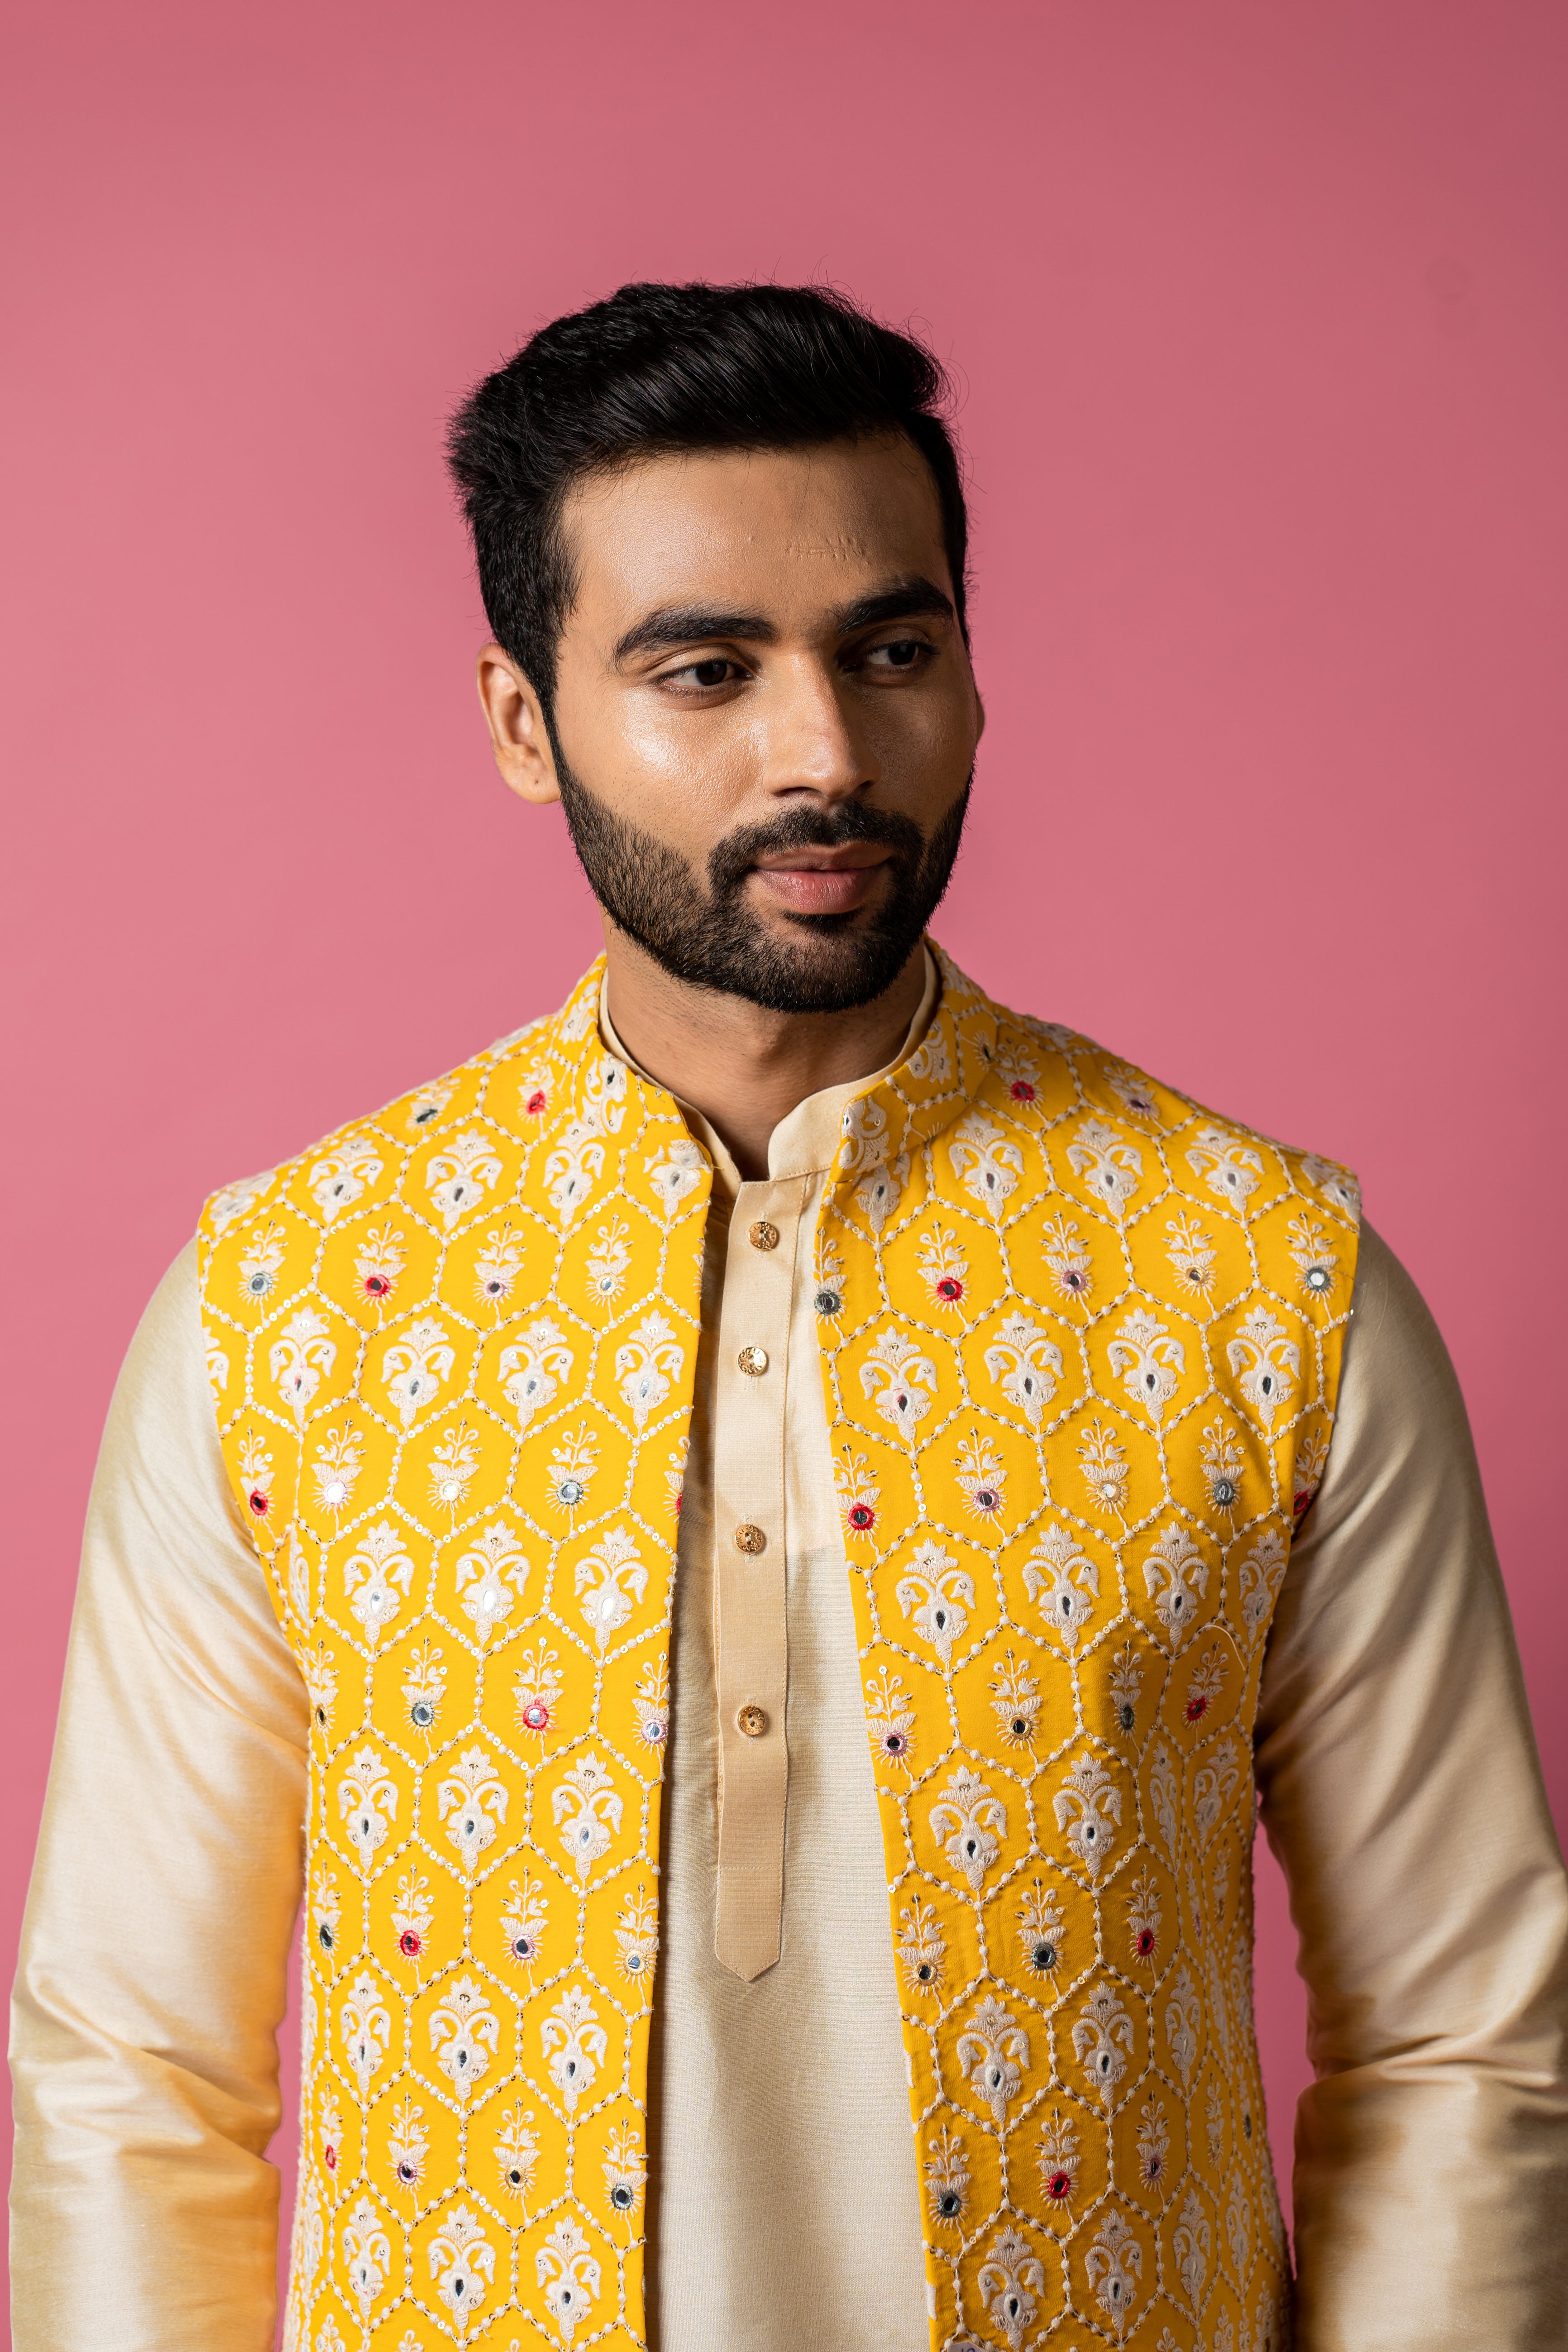 Men's Ethnic Wear Gets A Creative Touch | by Ankita S. | Medium